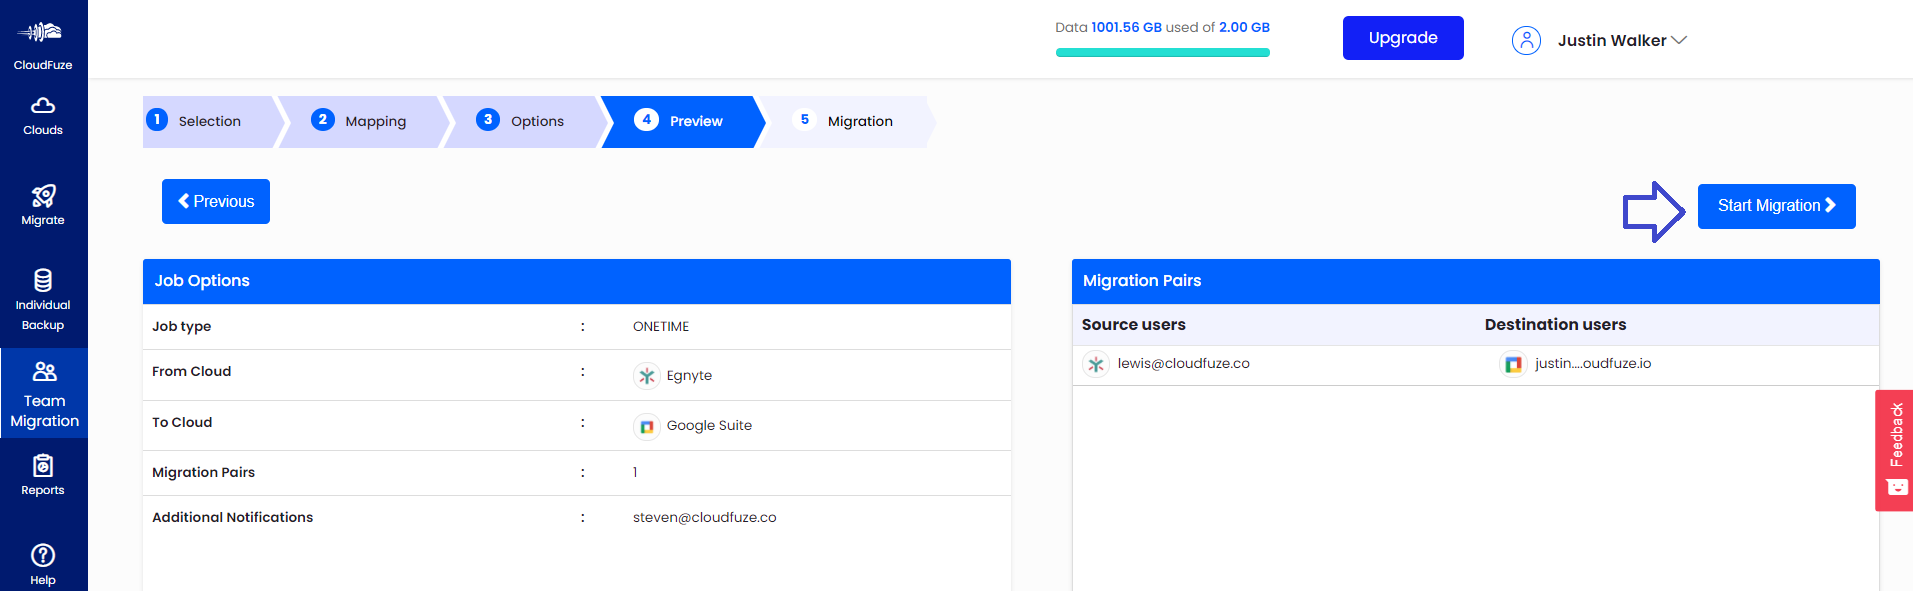 Preview and Start Migration